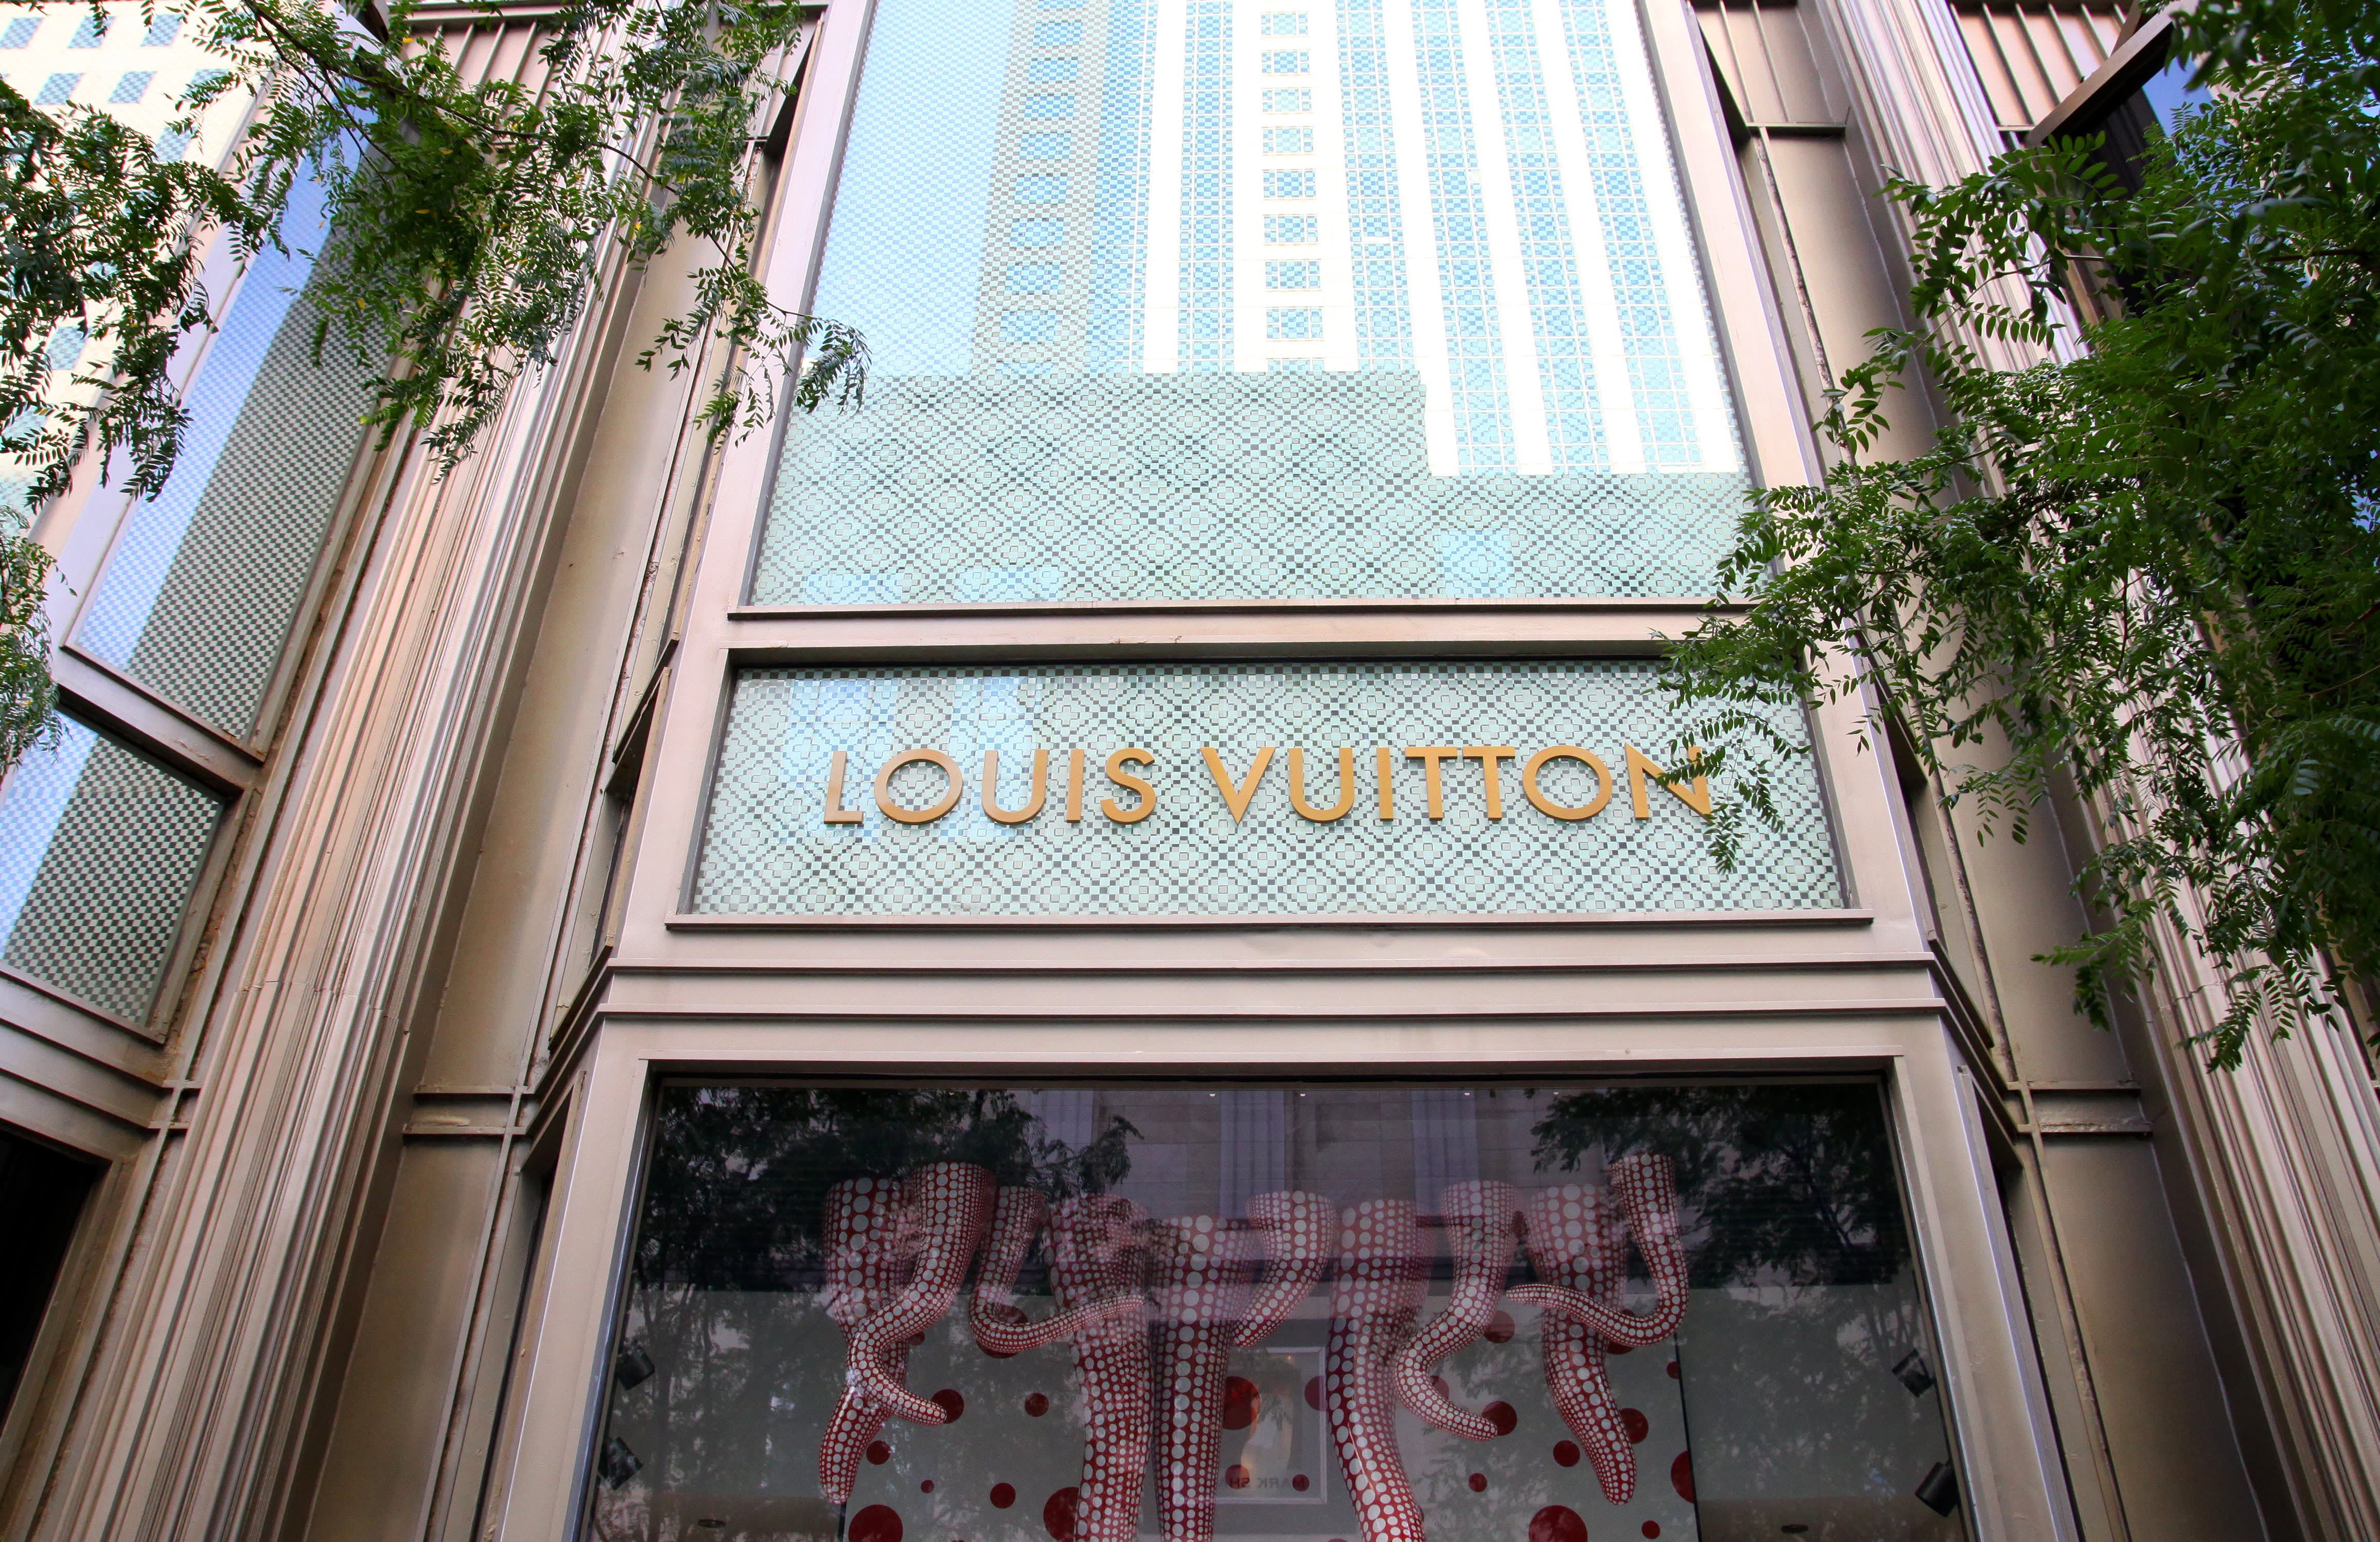 Brand Strategies that made LVMH luxury powerhouse- The Strategy Story